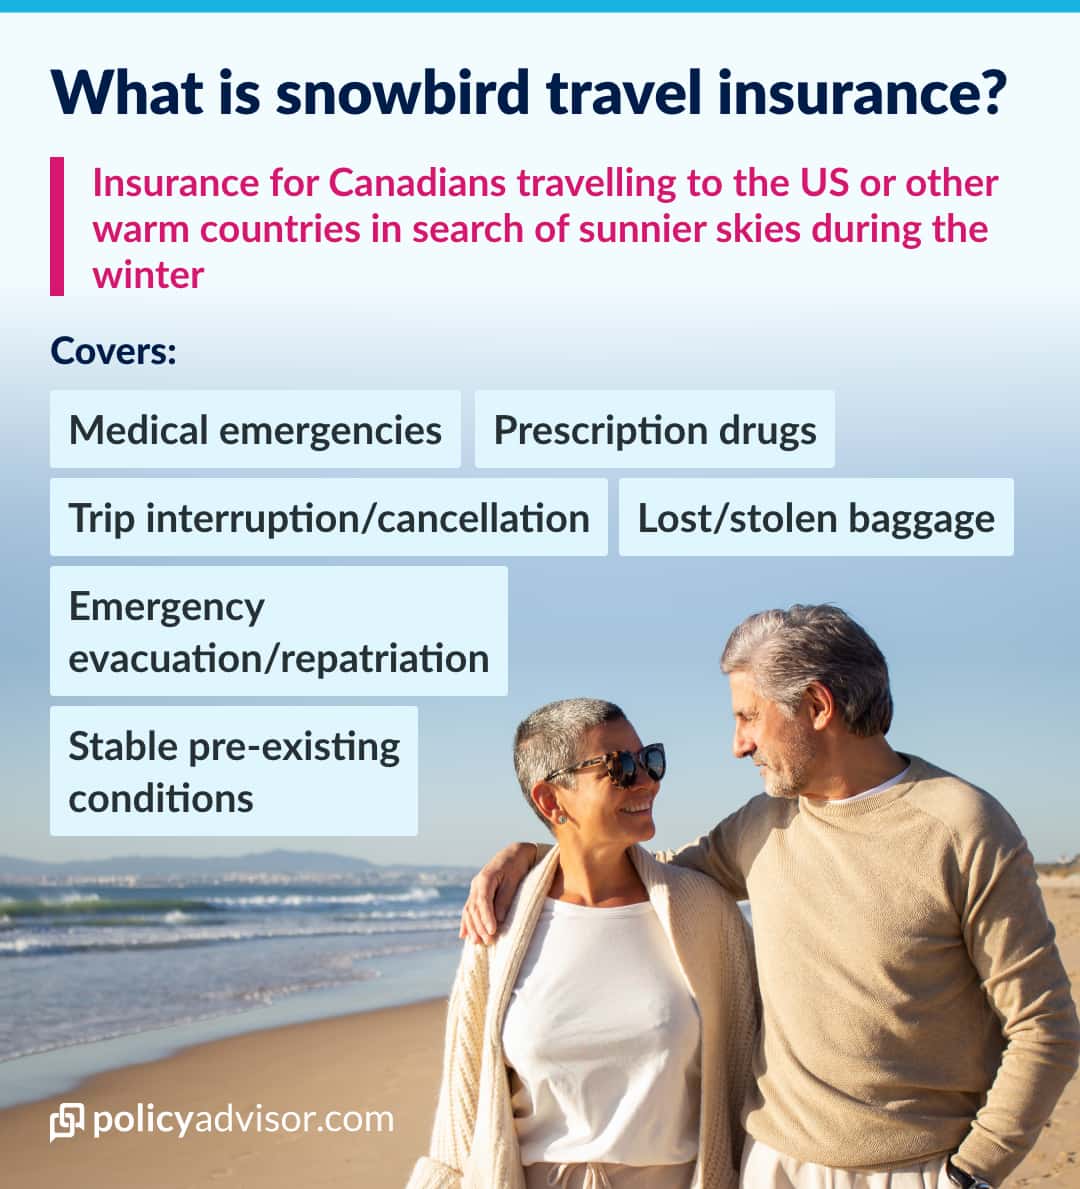 Travel insurance for Canadian snowbirds covers several things.